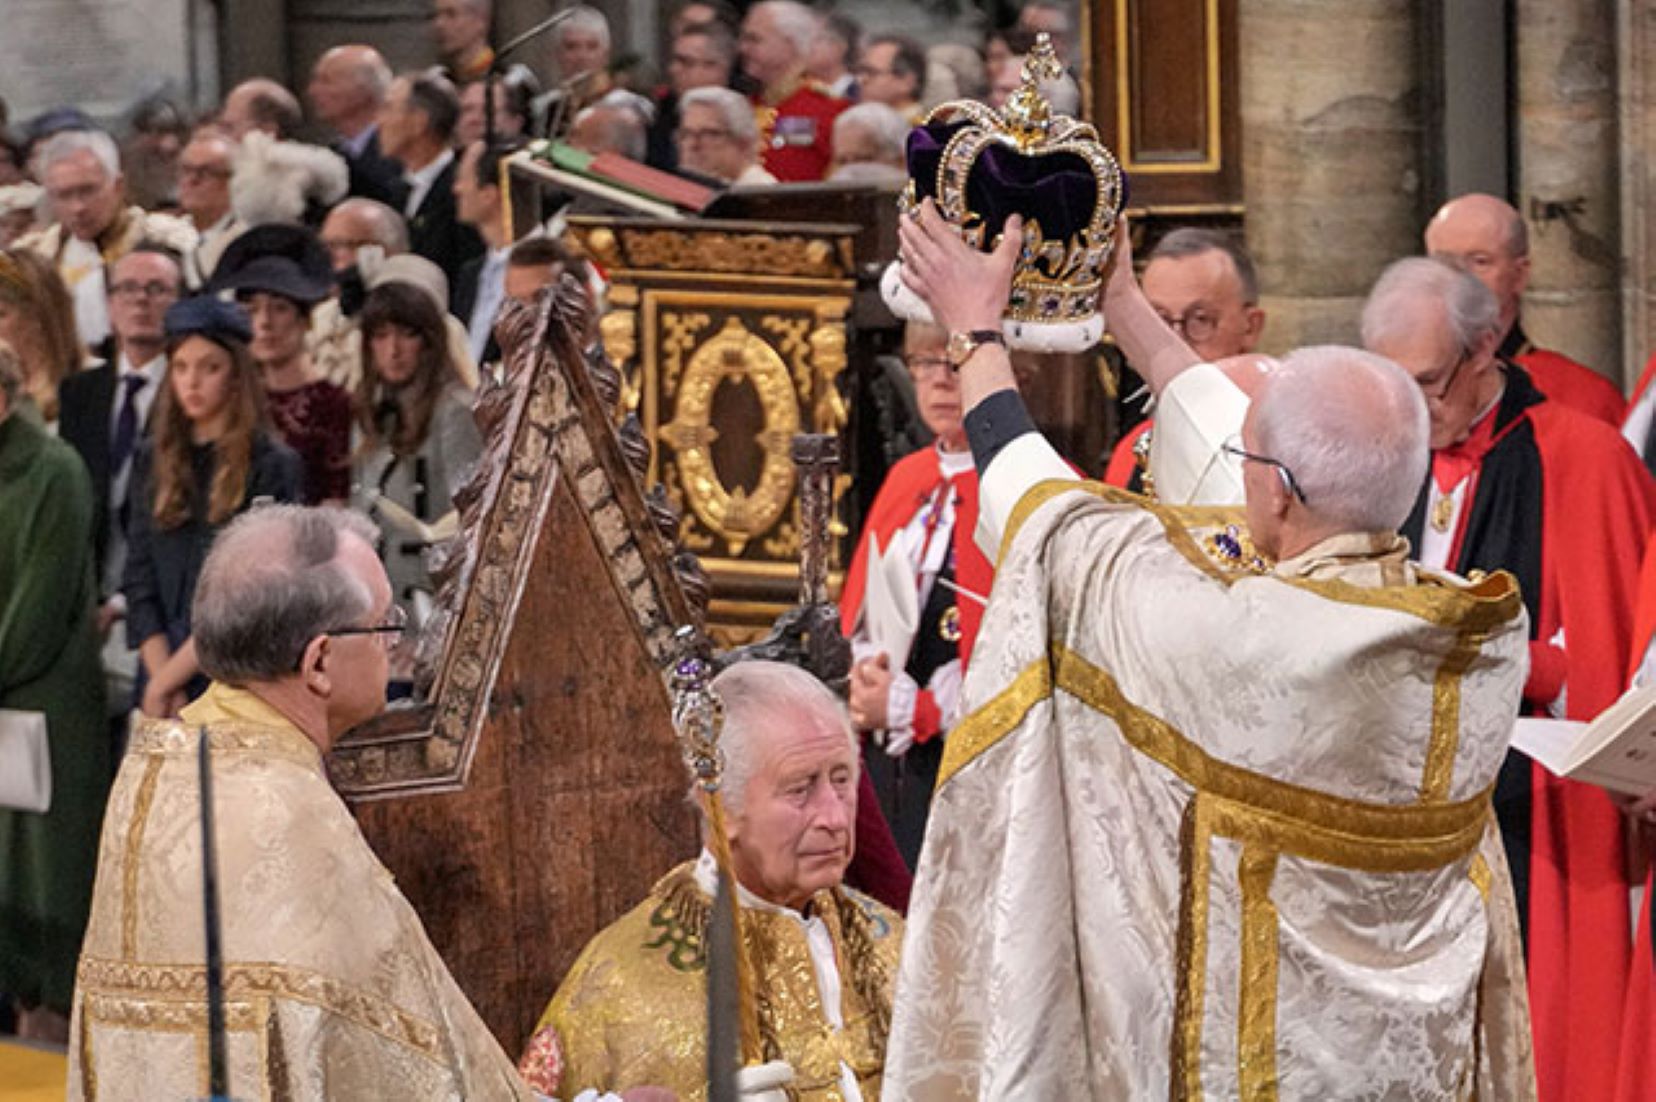 Charles III Crowned King At UK’s First Coronation In 70 Years